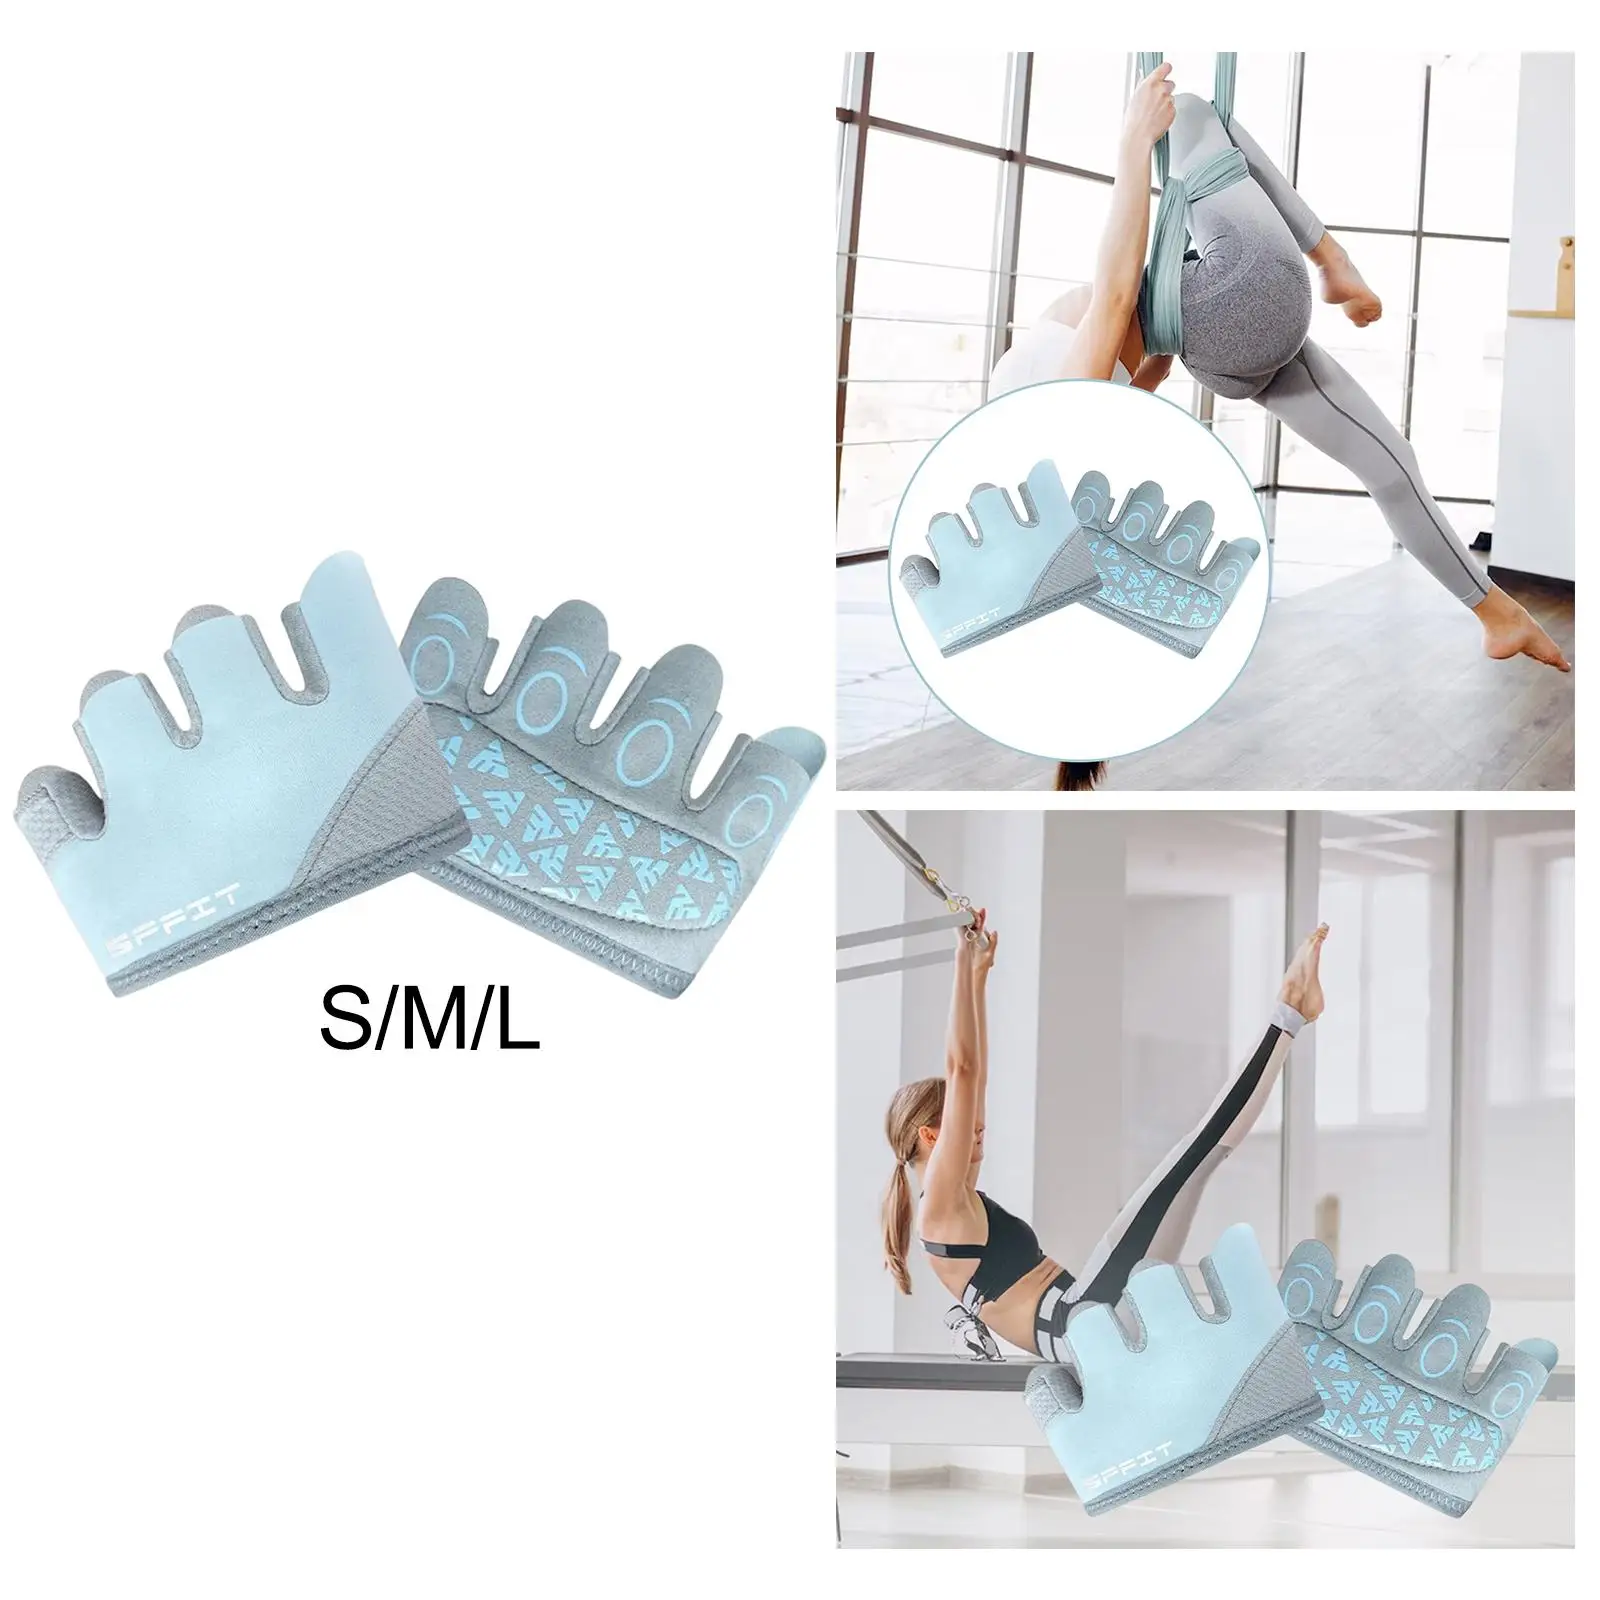 2x Half Finger Workout Gloves Women Weight Lifting for Exercise Pull up